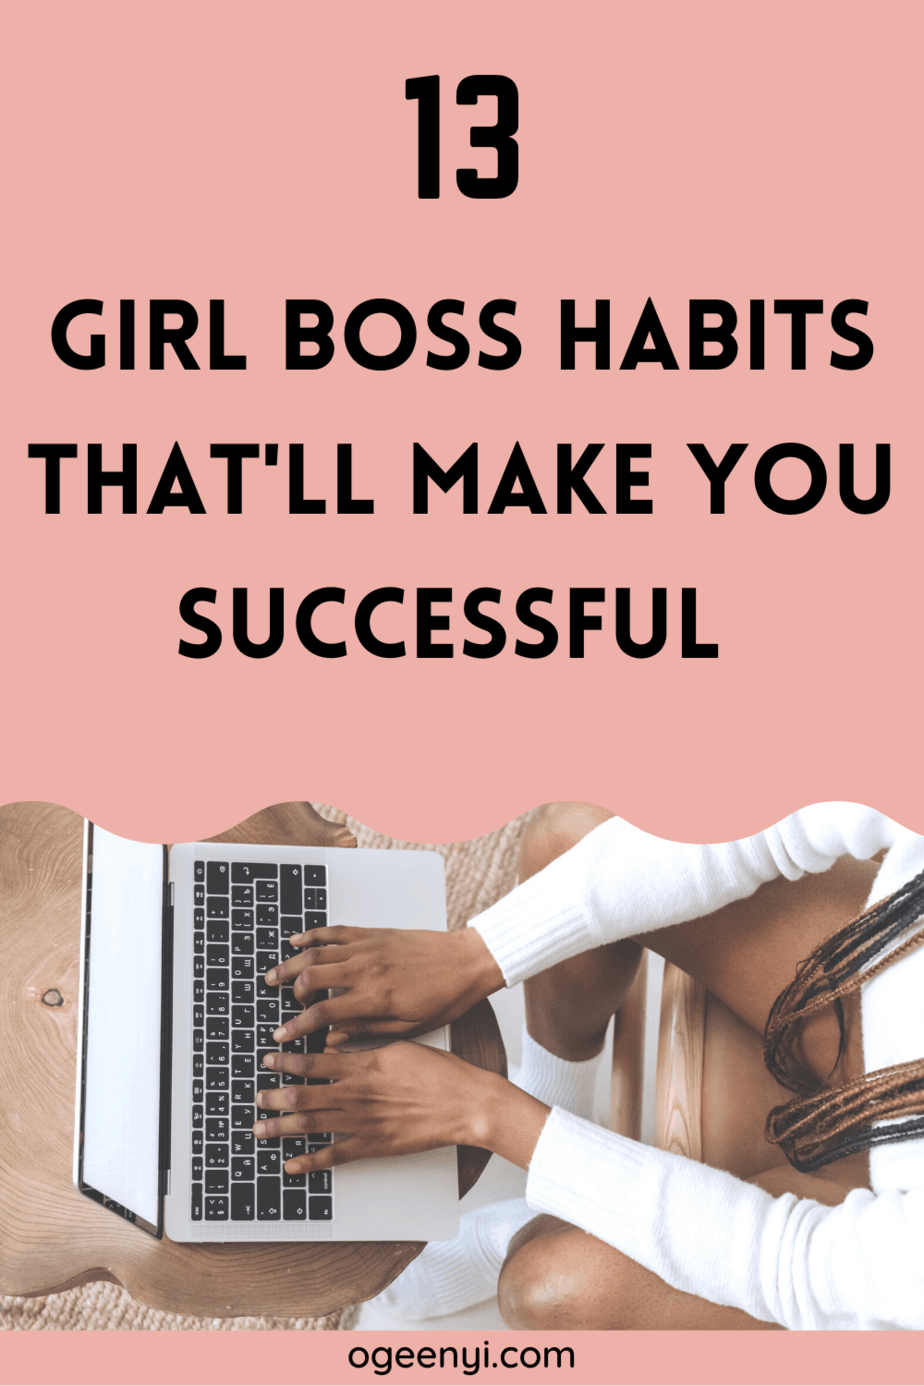 13 Girl boss habits that will make you successful 